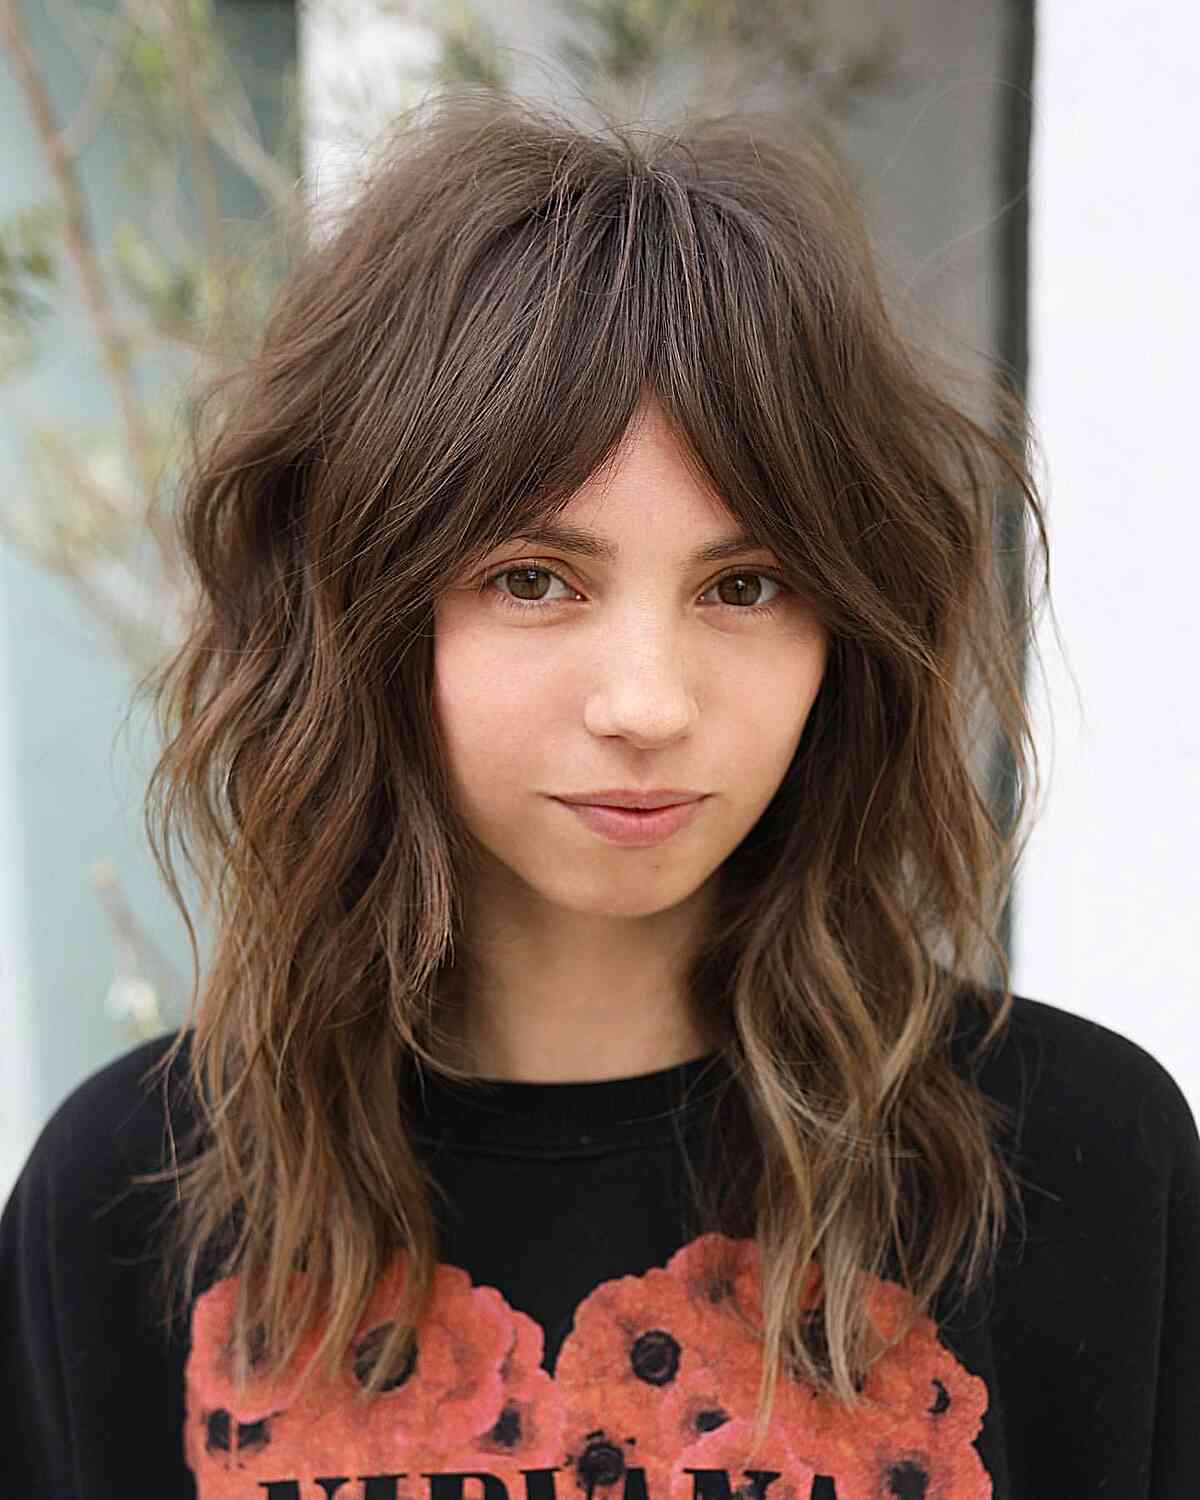 Medium-Length Shaggy Cut for Thick Hair with Curtain Bangs for ladies with messy layered hair